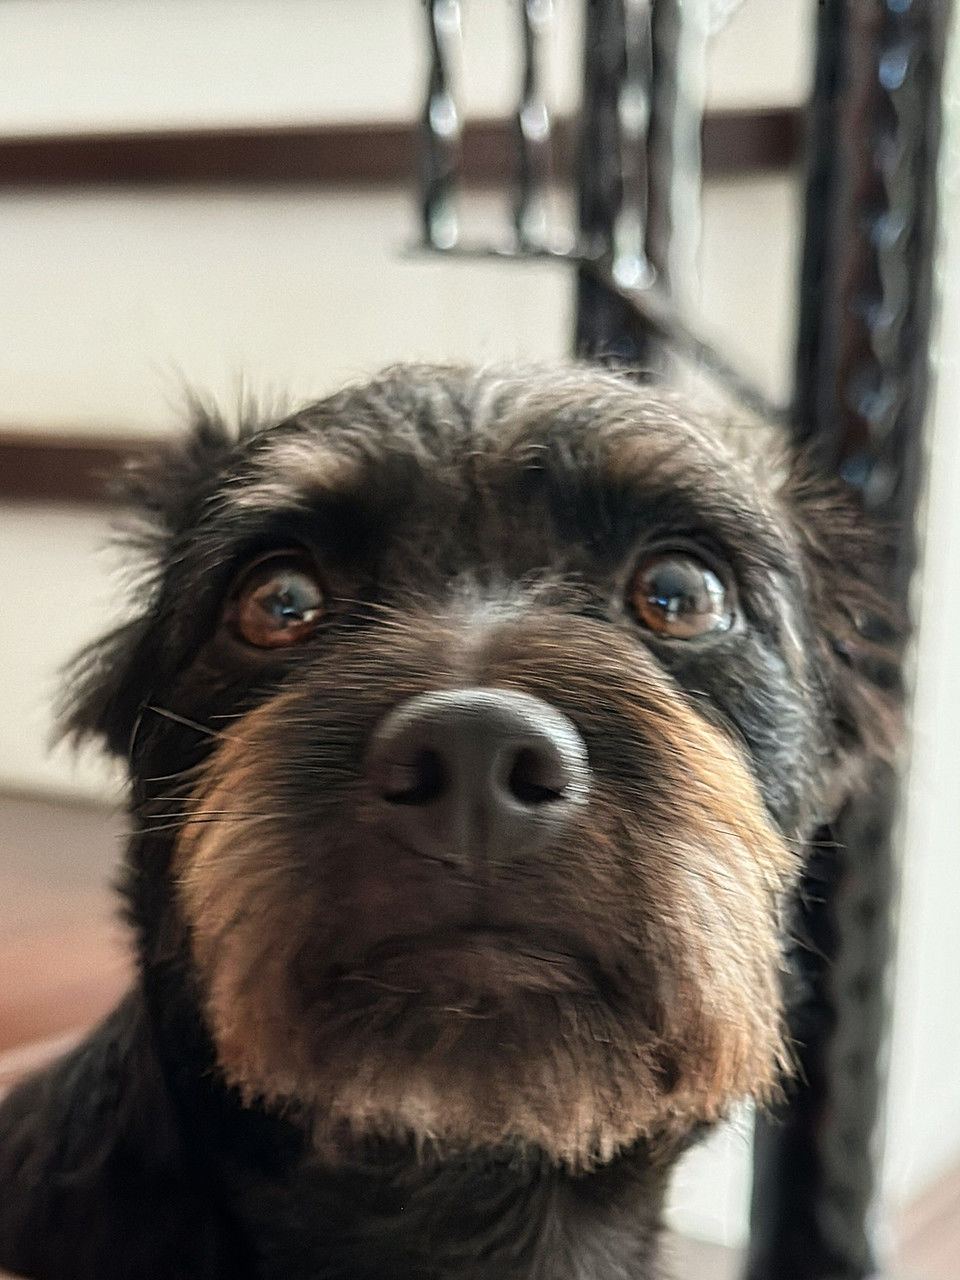 one animal, animal themes, mammal, animal, dog, pet, domestic animals, canine, portrait, looking at camera, close-up, animal body part, puppy, black, animal head, no people, focus on foreground, indoors, terrier, lap dog, carnivore, snout